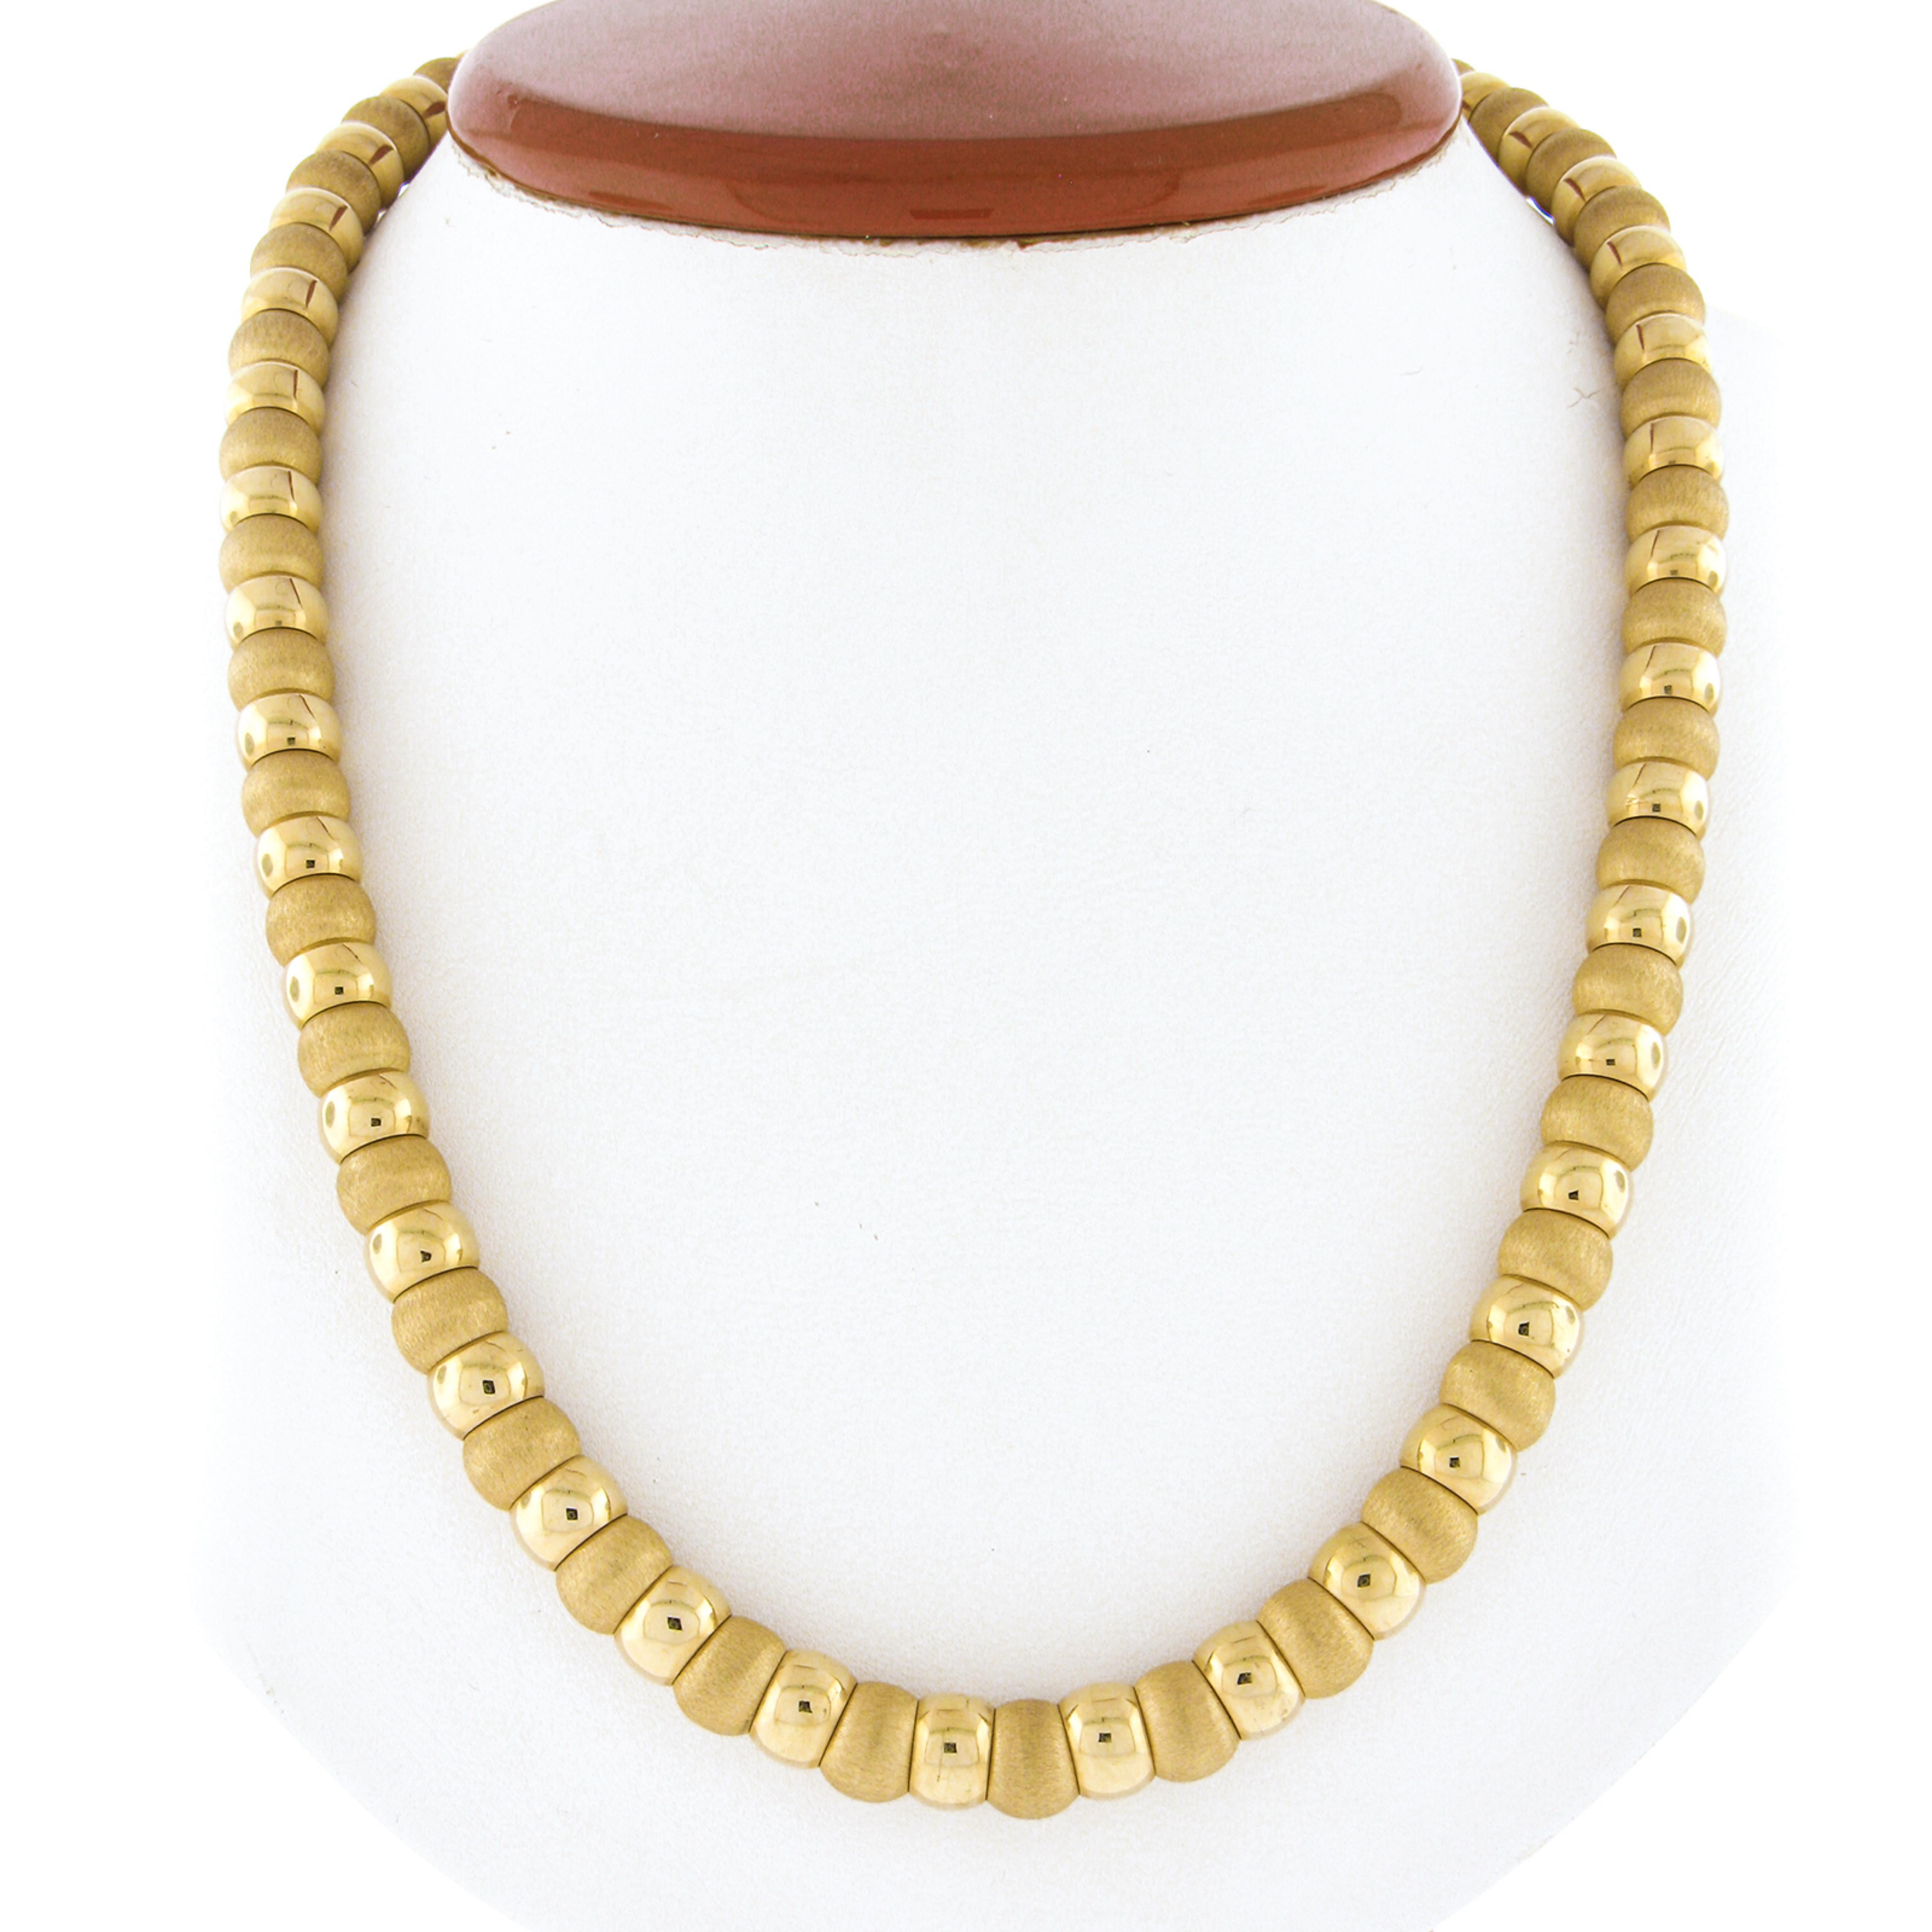 Here we have an absolutely gorgeous necklace by Milor that was crafted in Italy from solid 18k yellow gold. This very well made piece features gold ball beads that have a fine brushed finish throughout and alternate with high polished links of which